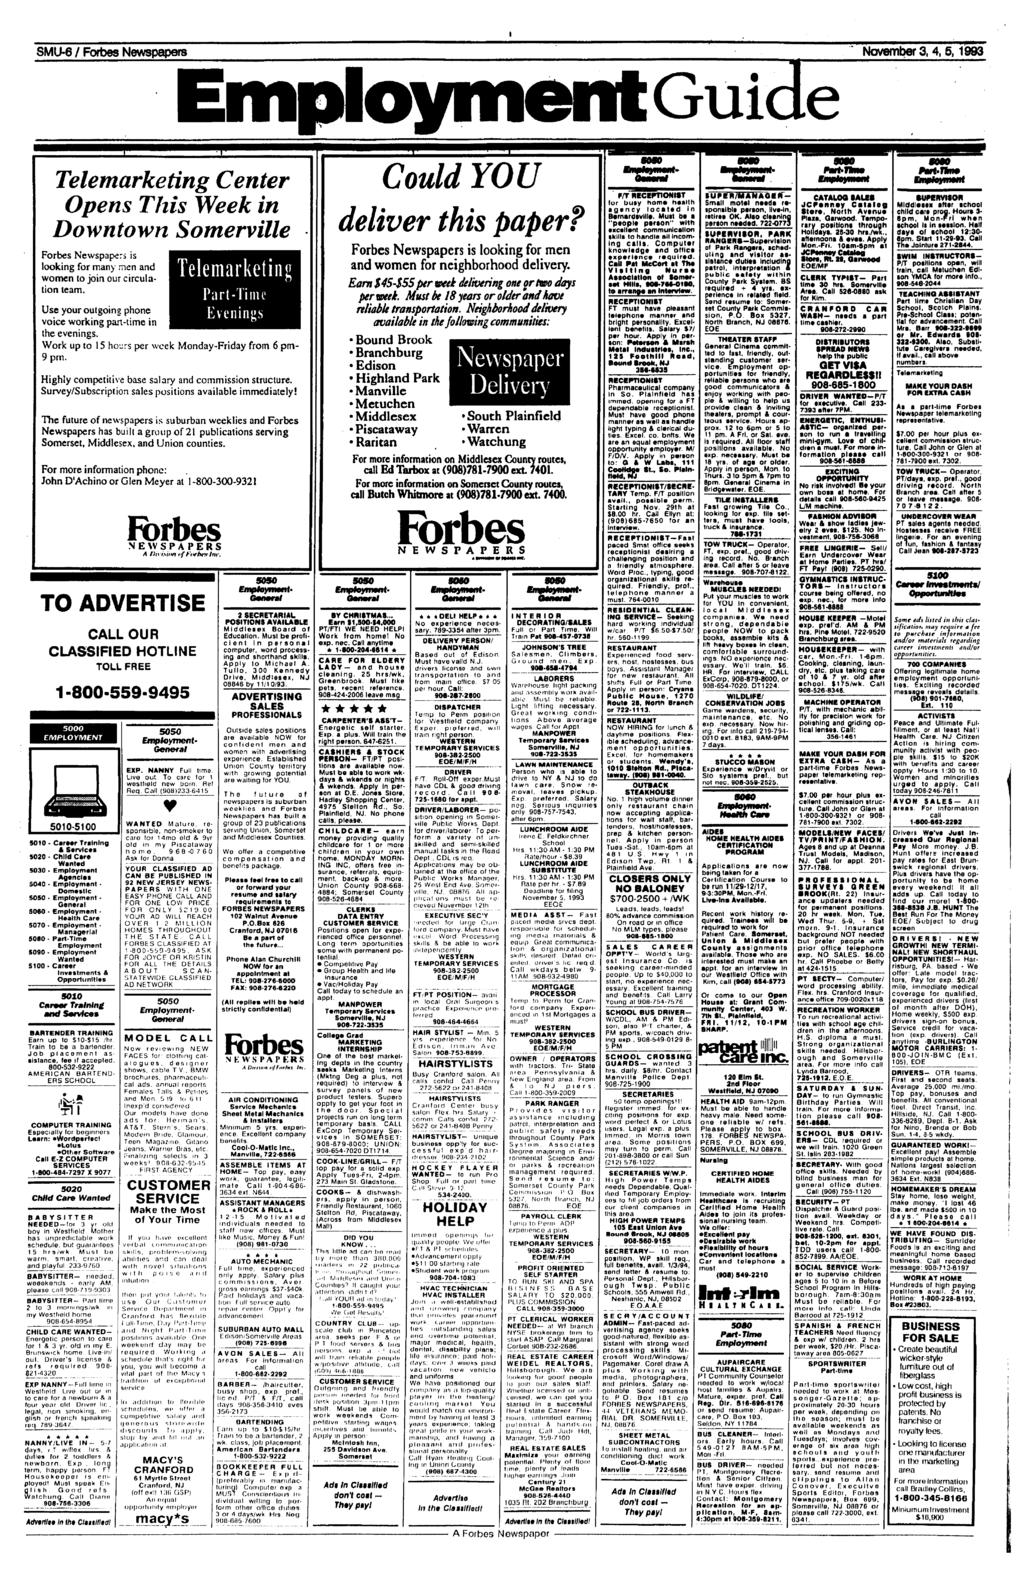 NewspapersEmployment SMU-6 /Forbes November Guide 3, 4, 5,1993 5010 $020 S030 5040 S050 S060 5070 soao S090 5100 Telemarketing Center Opens This Week in Downtown Somerville Forbes Newspapers is